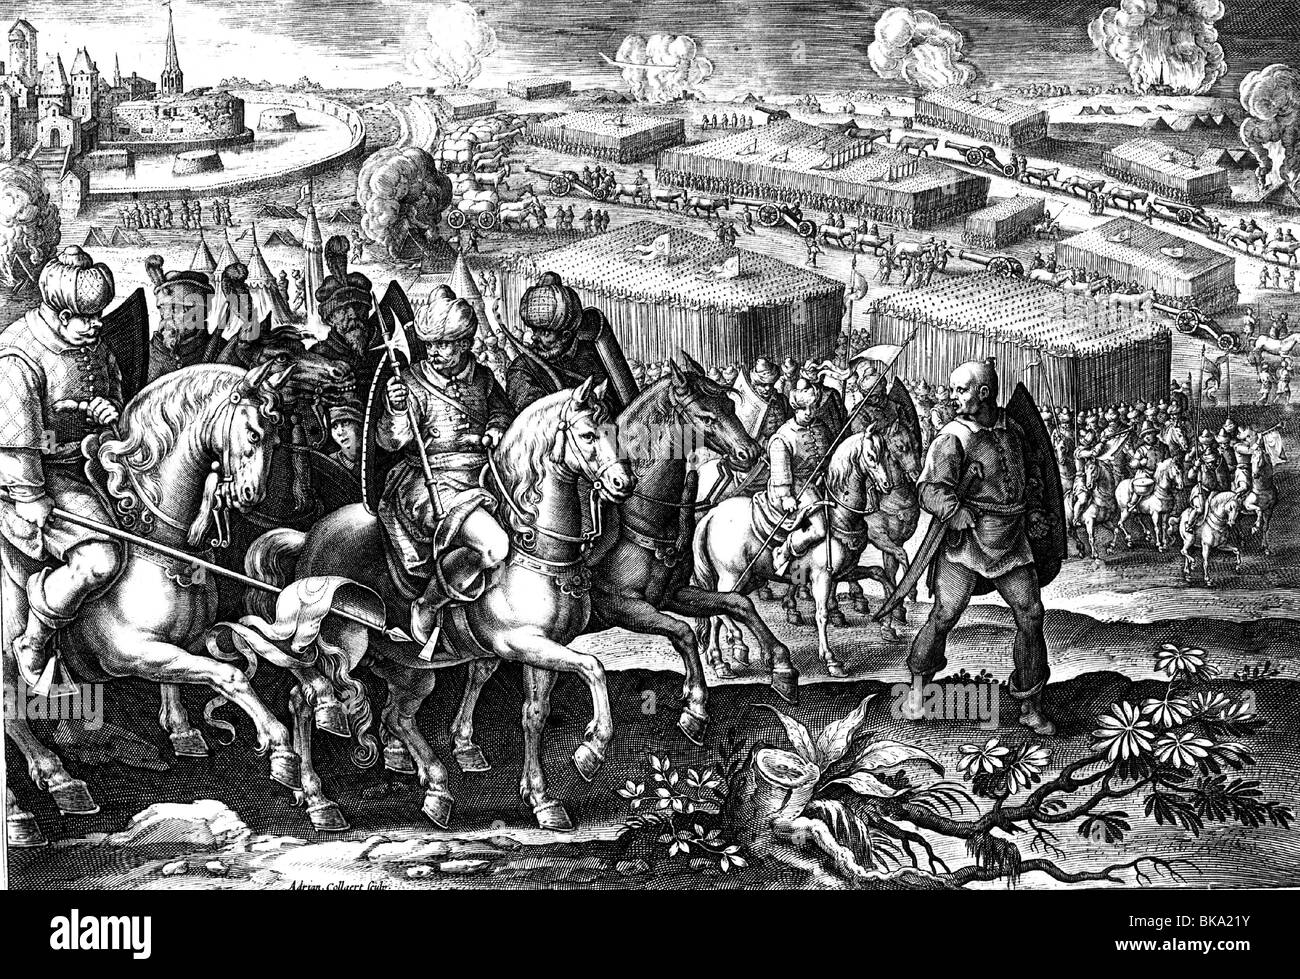 events, Ottoman Wars, Siege of Vienna 1529, retreat of the Ottoman army after several unsuccessful attempts to capture the city, copper engraving by A. Gollaert after drawing by Johannes Stradanus, 1589, Stock Photo